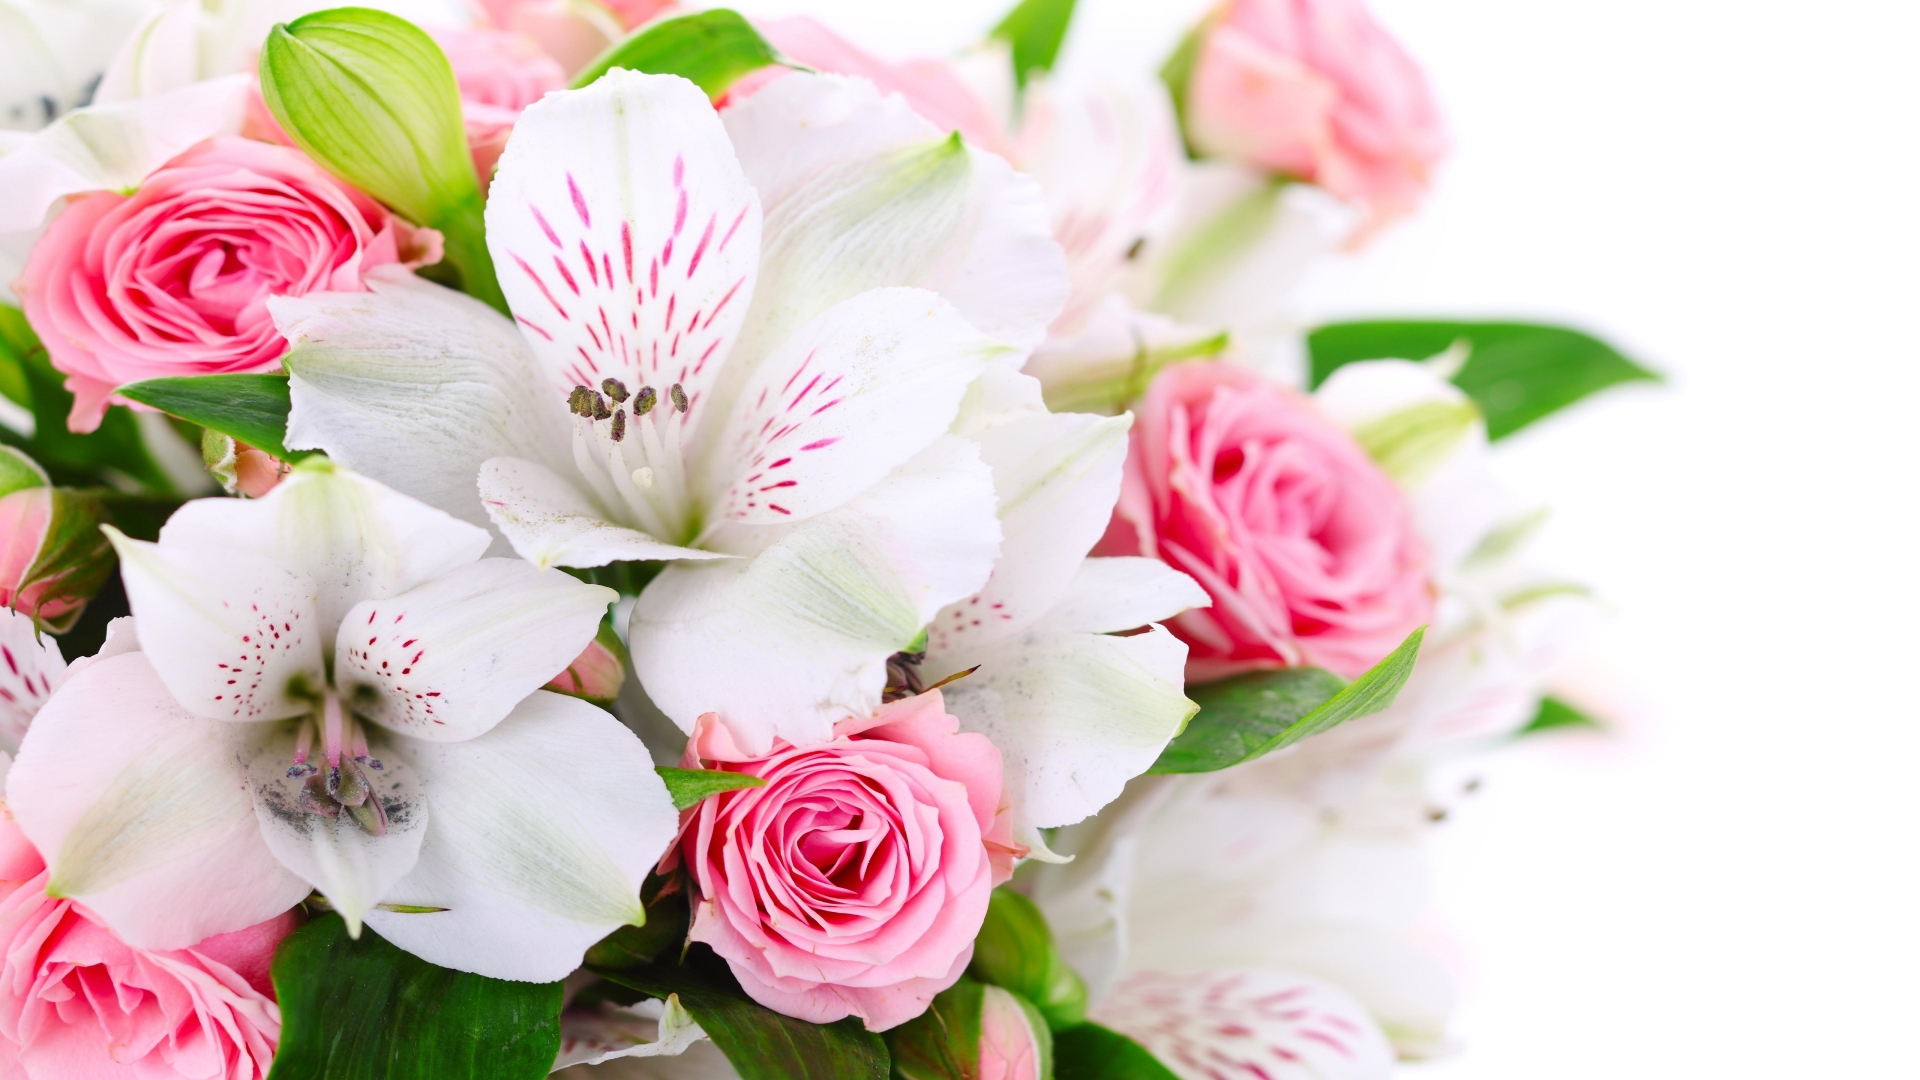 Pink Roses and White Lilies  for 1920 x 1080 HDTV 1080p resolution